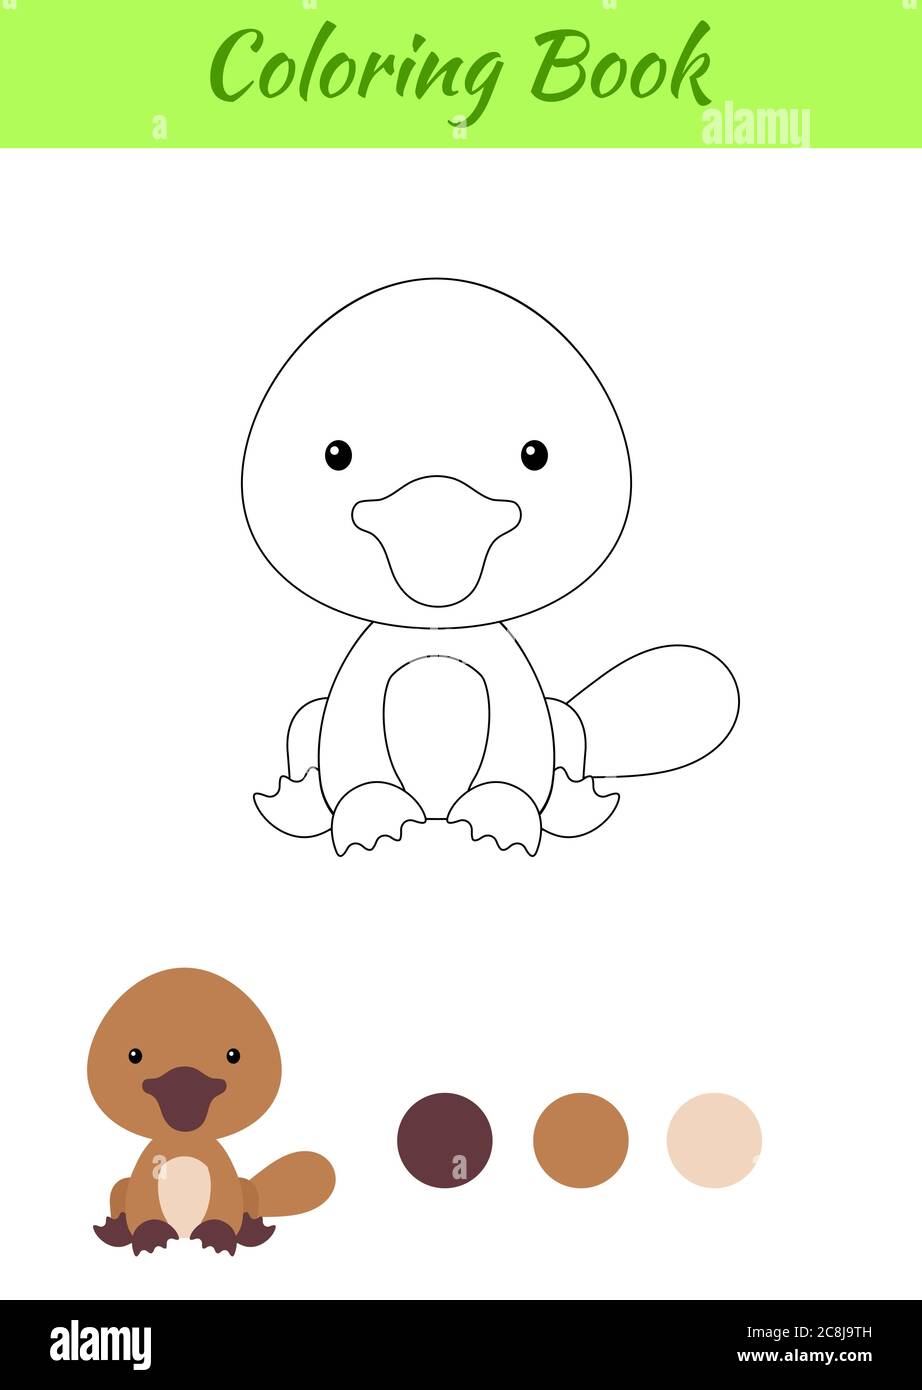 Coloring Page Little Sitting Baby Platypus Coloring Book For Kids Educational Activity For Preschool Years Kids And Toddlers With Cute Animal Stock Vector Image Art Alamy